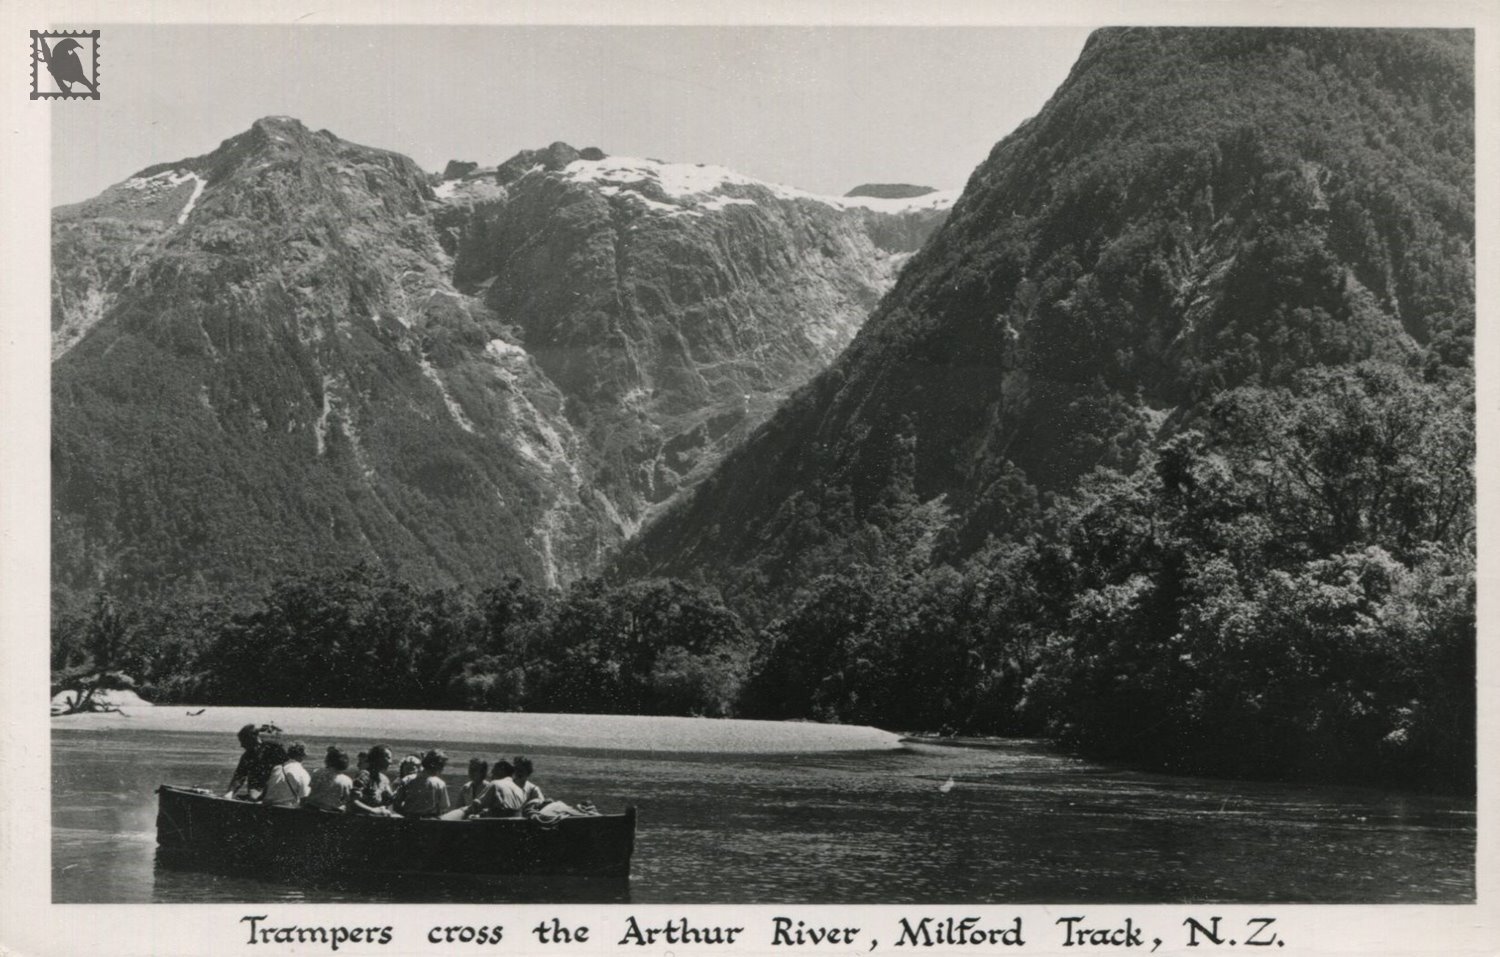 Fiordland - Trampers Cross the Arthur River, Milford Track